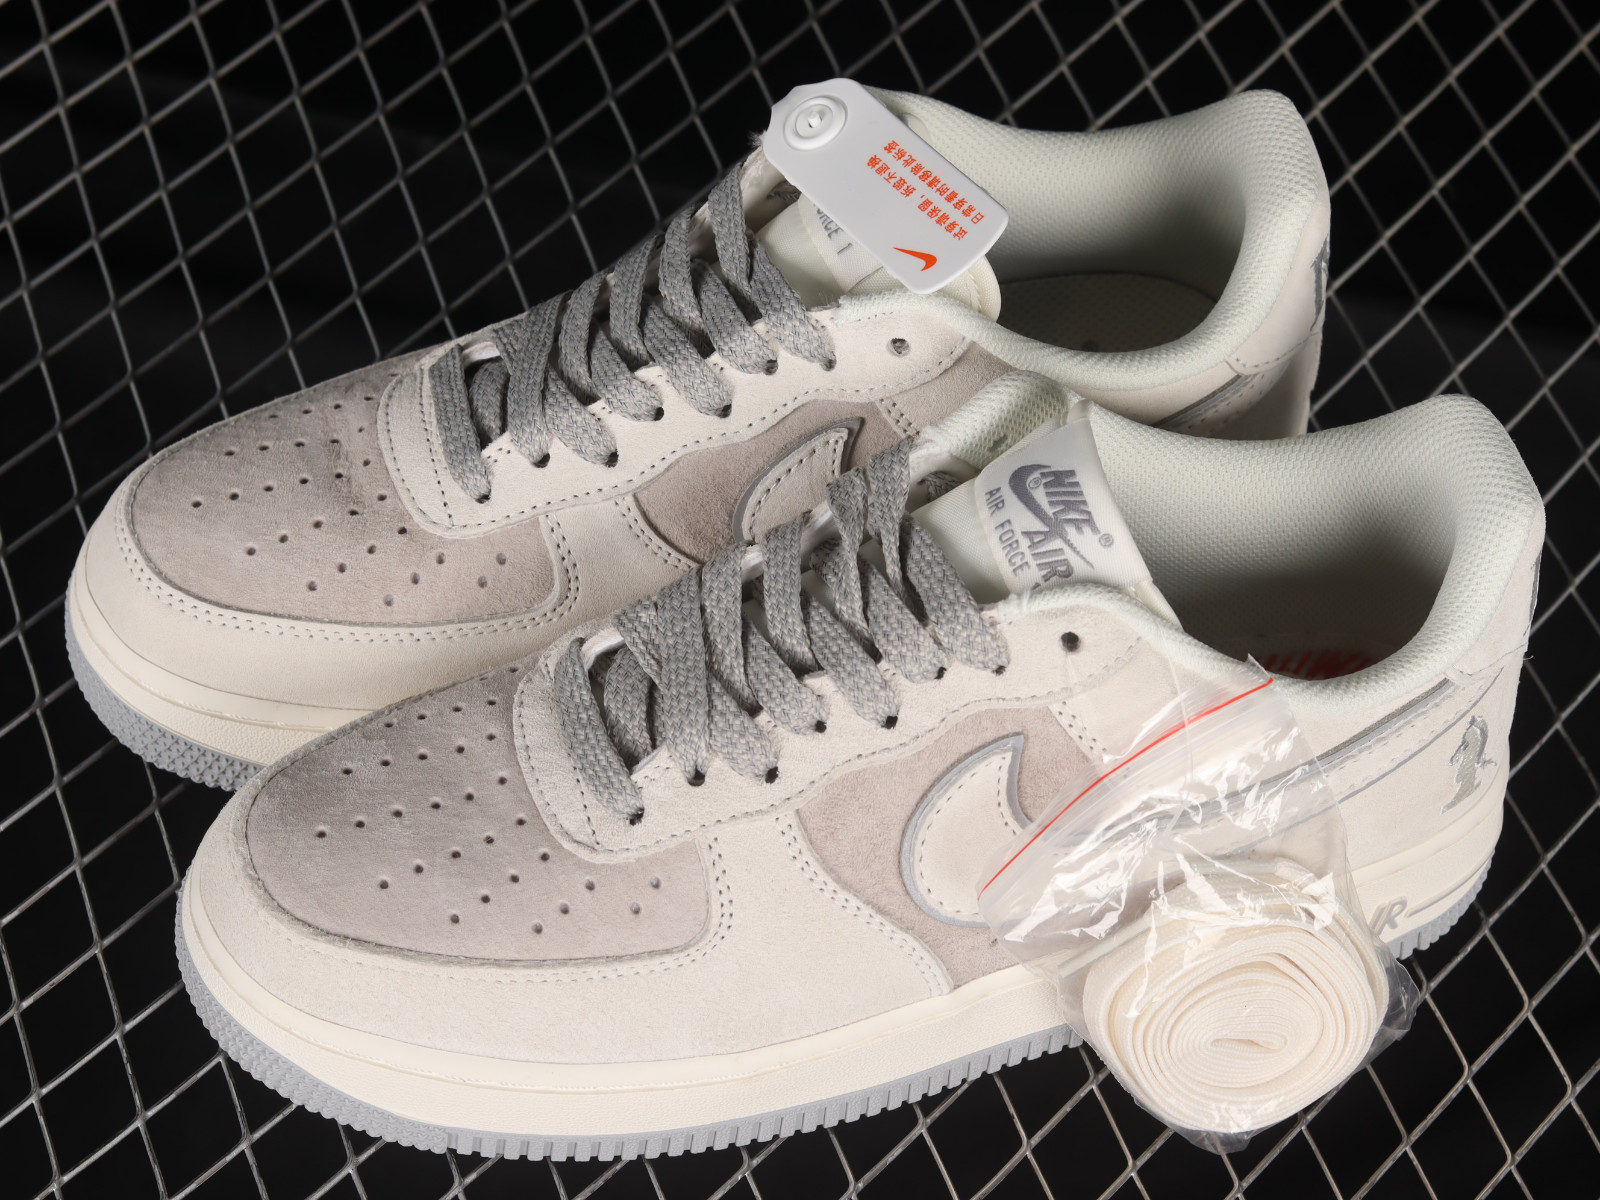 nike air tech challenge 2 french open - MultiscaleconsultingShops - 005 Nike Air Force 1 07 Low Four Horsemen PE Suede Dark Grey White DZ3696